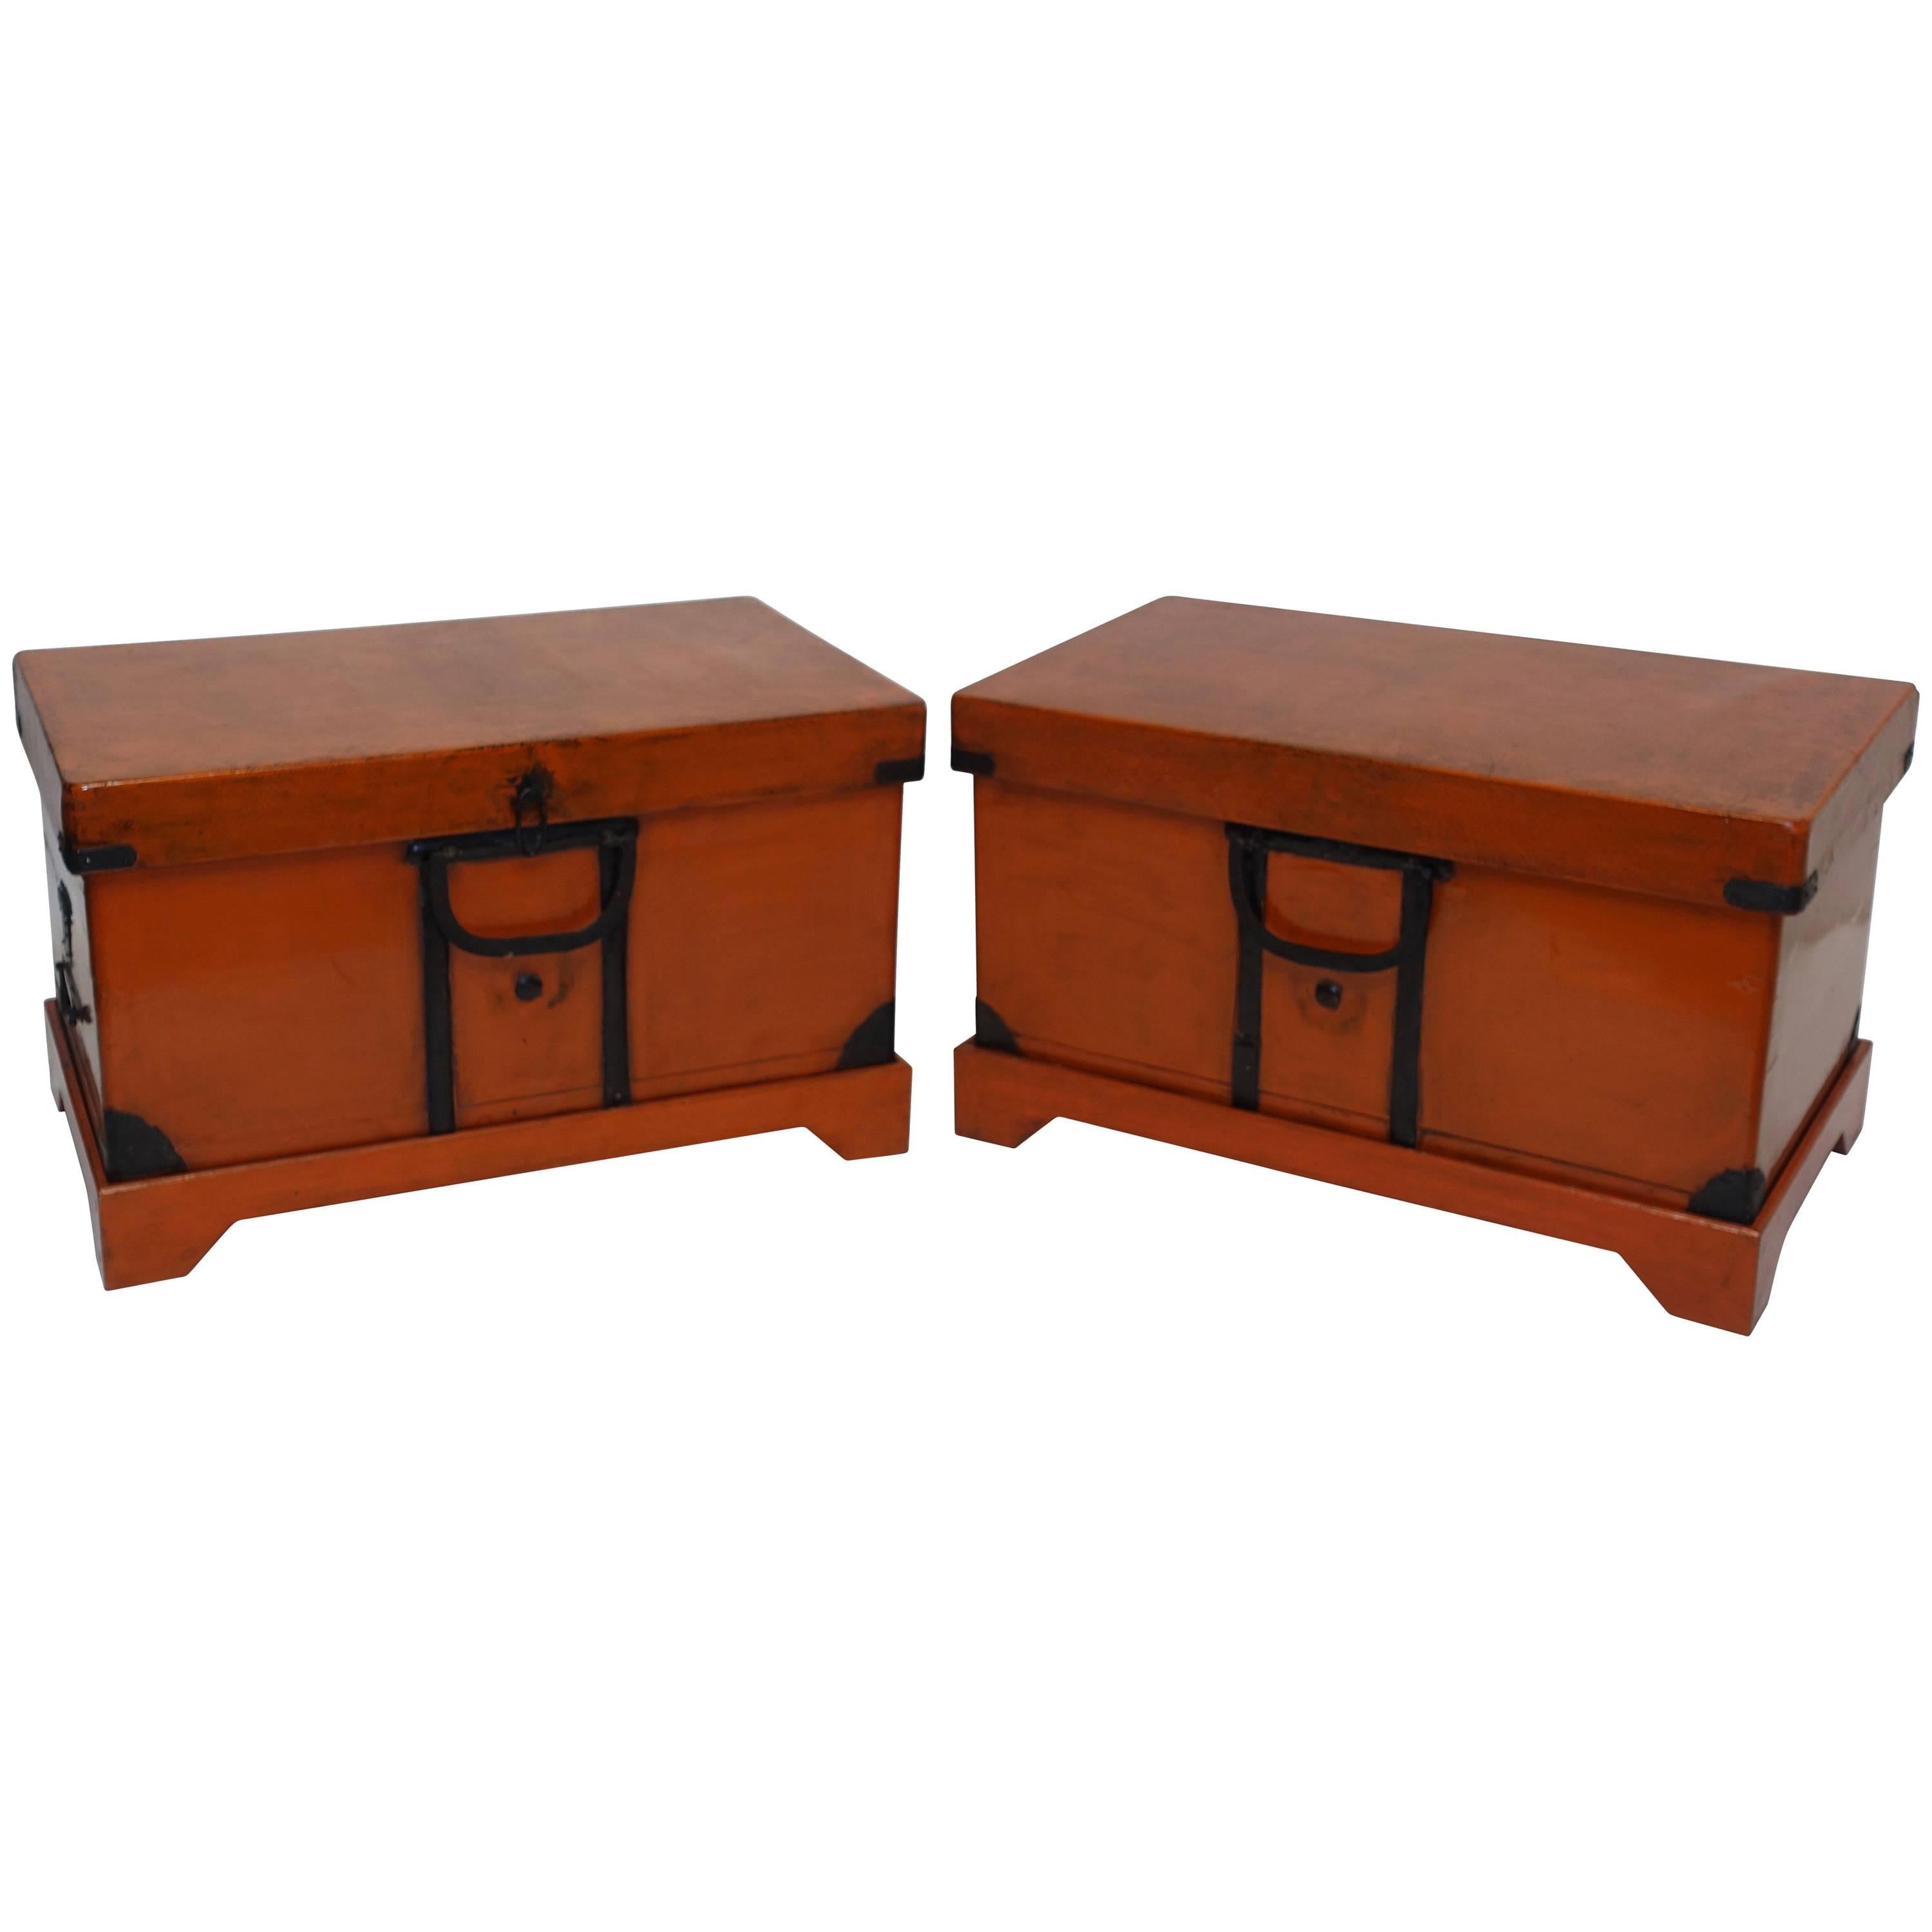 Pair of Japanese Lacquered Trunks or Tables on Custom Stands, 19th Century